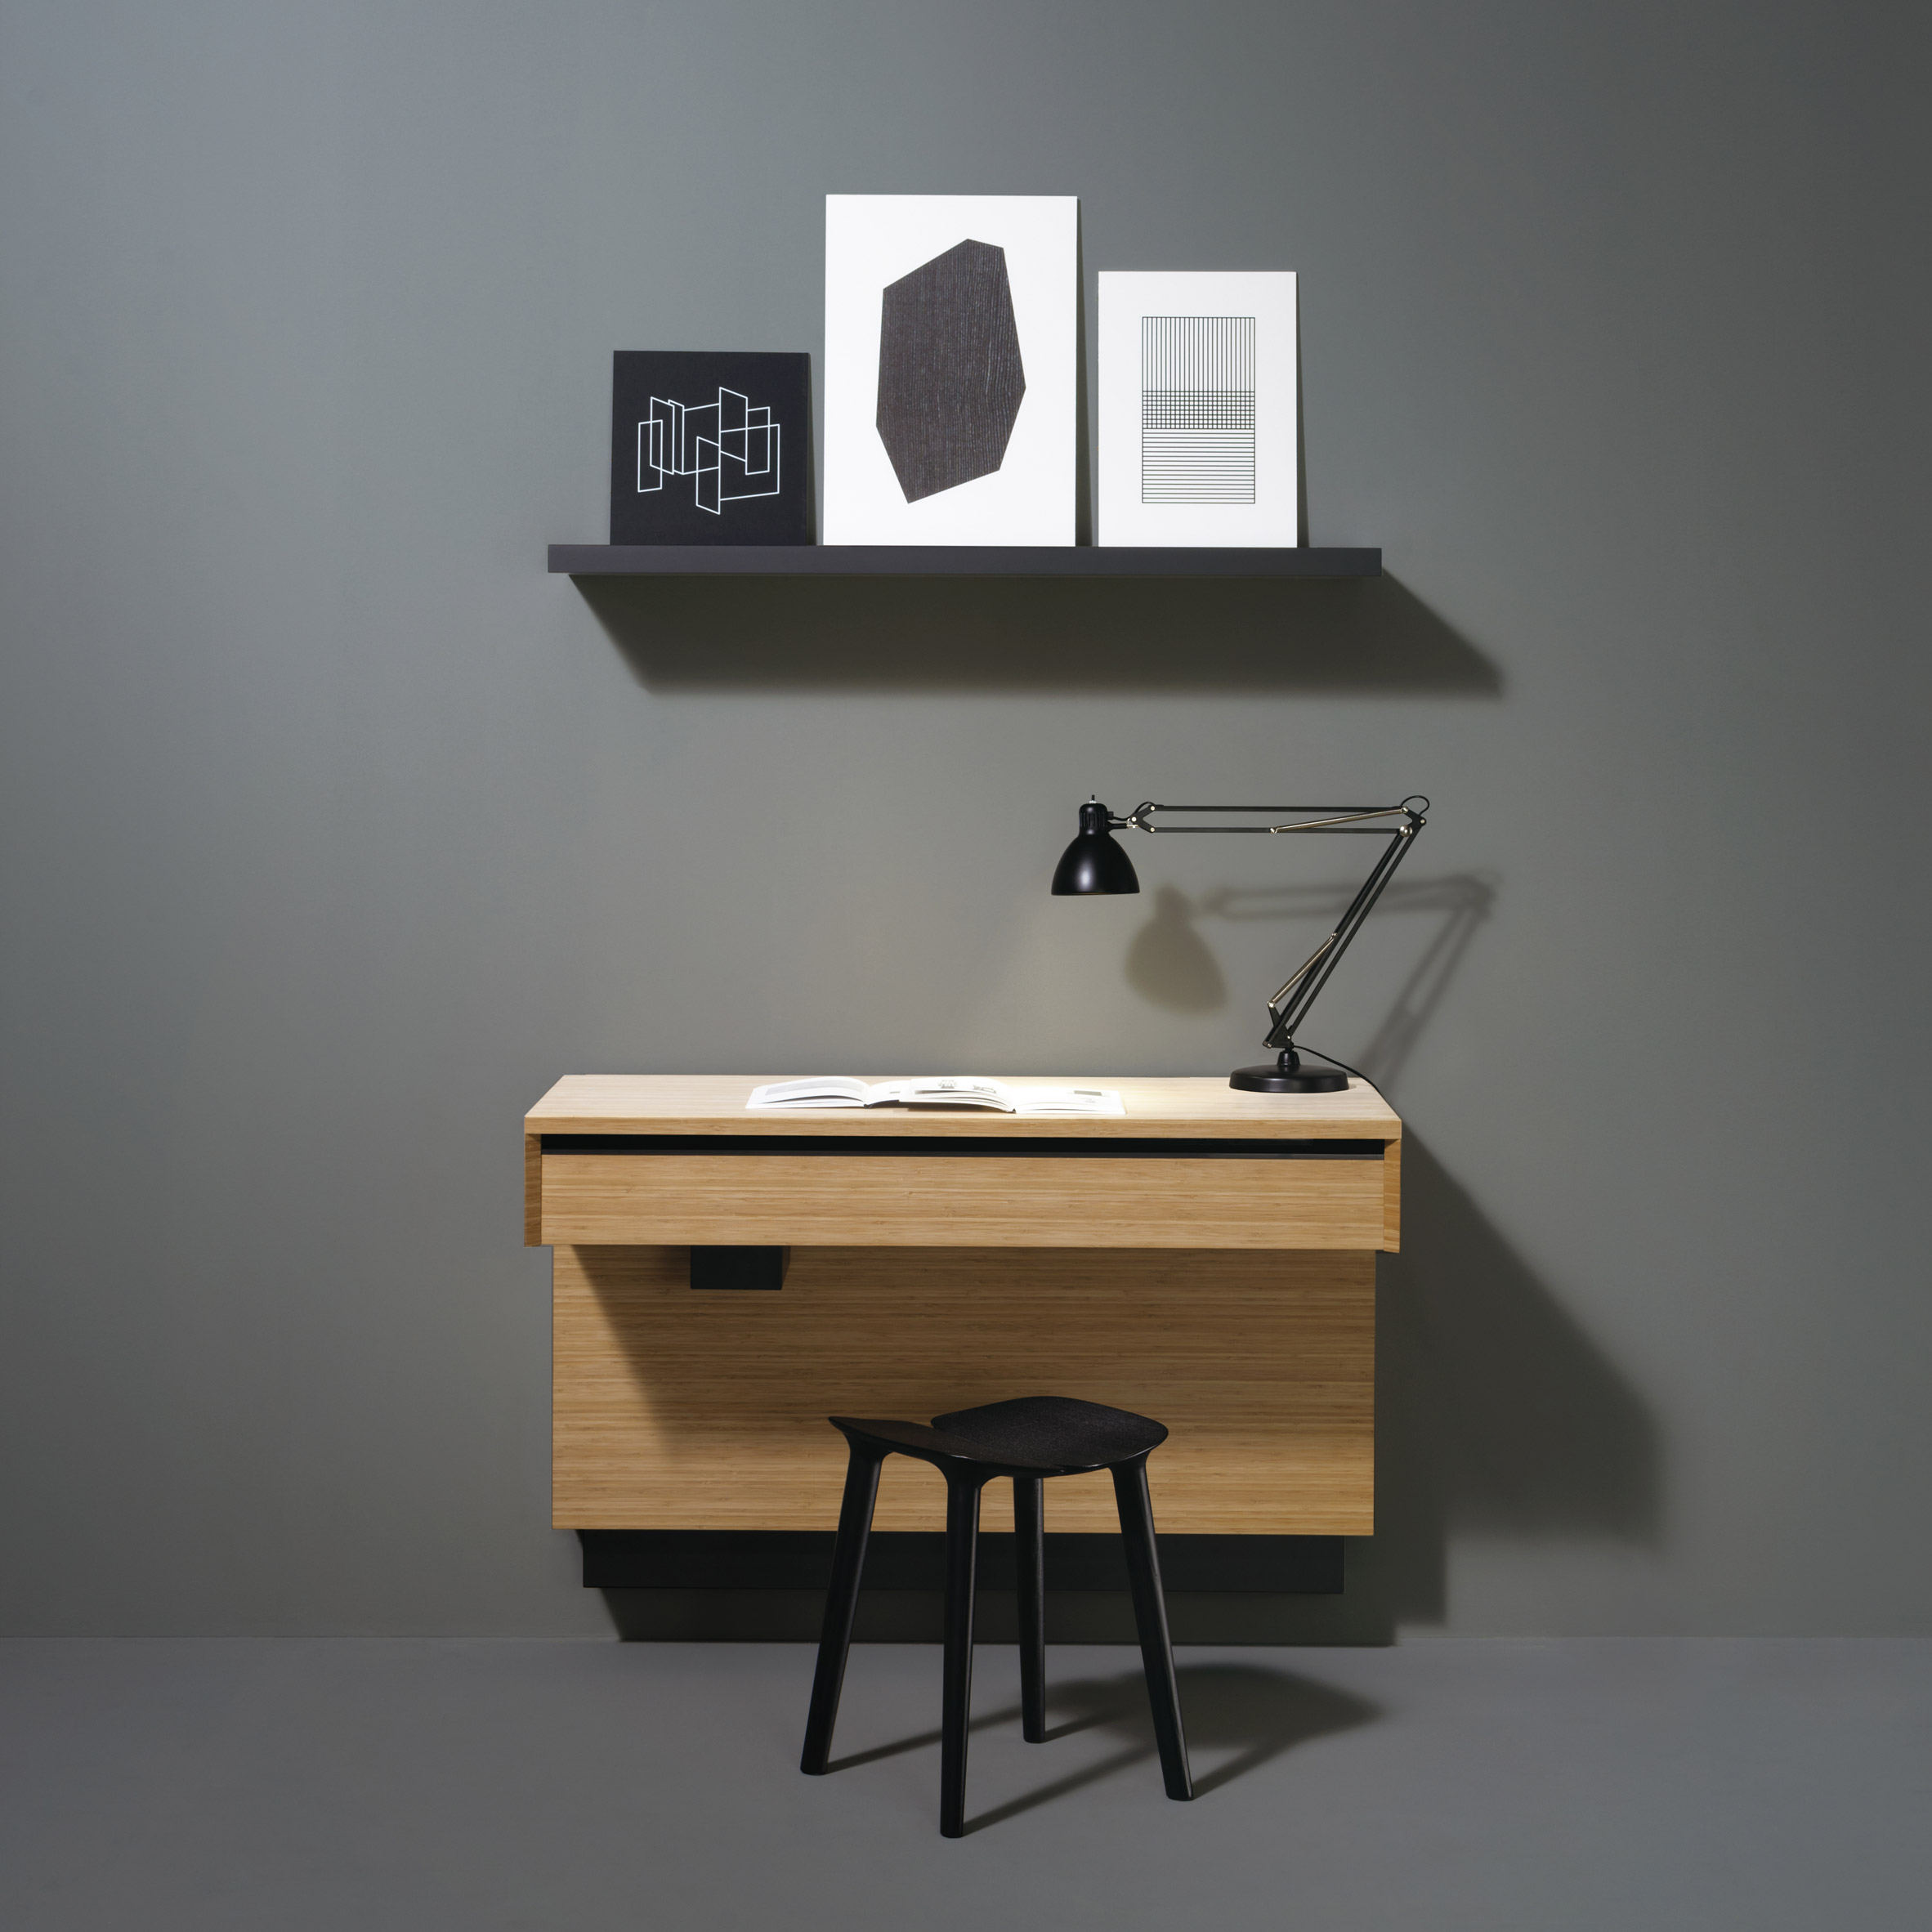 Sanwa unveils latest collection of tiny kitchens for micro homes